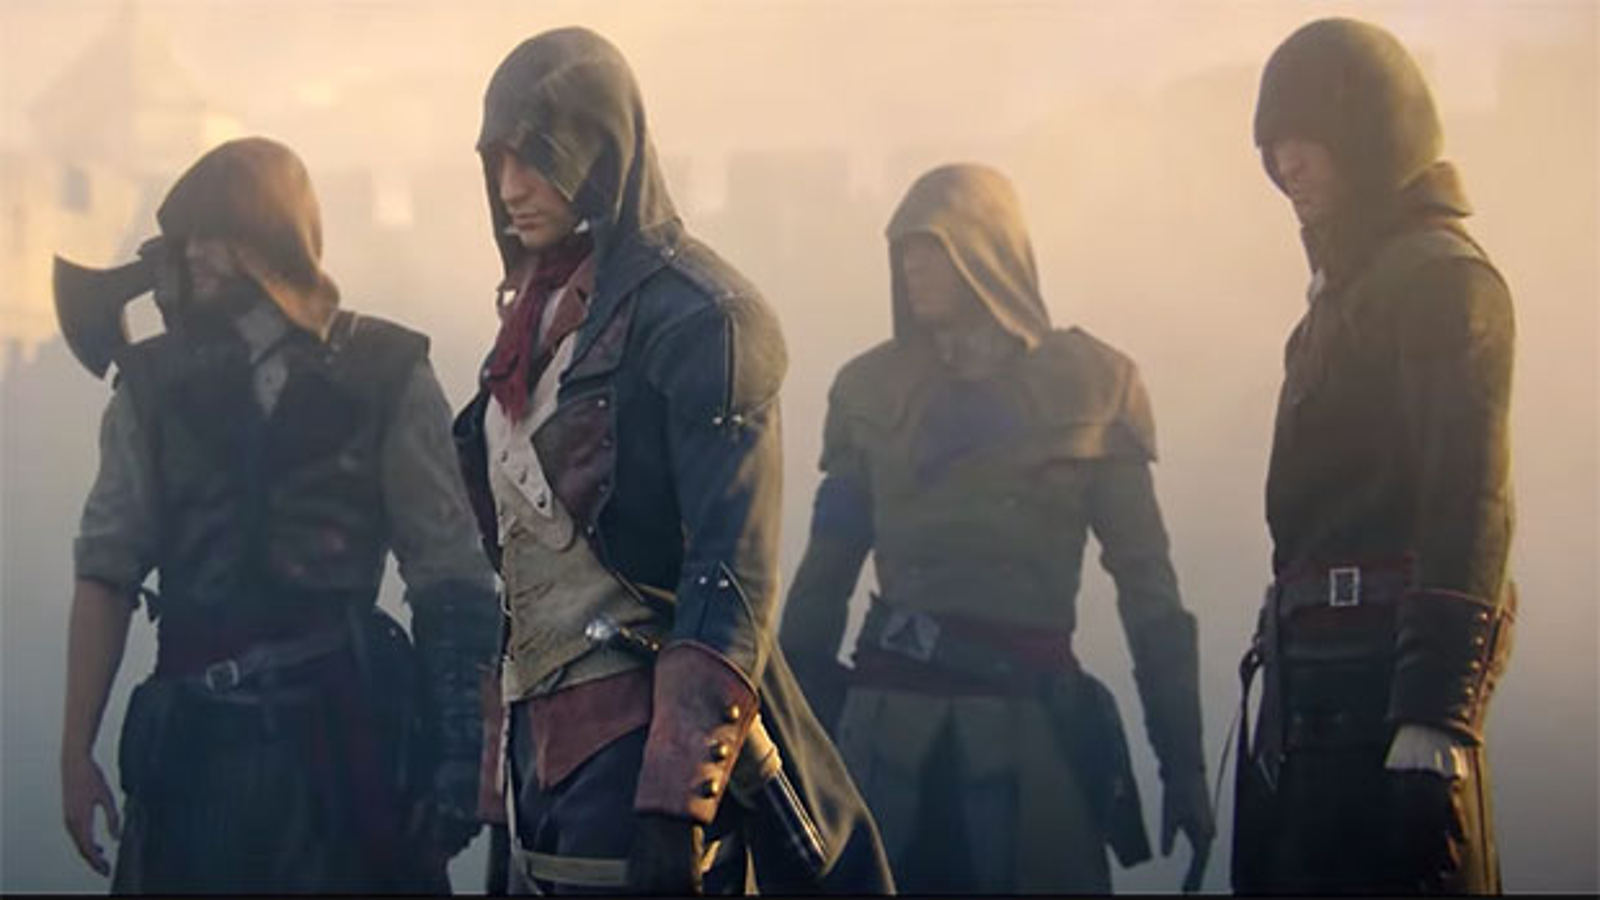 Assassin's Creed: Unity impossible on PS3/X360